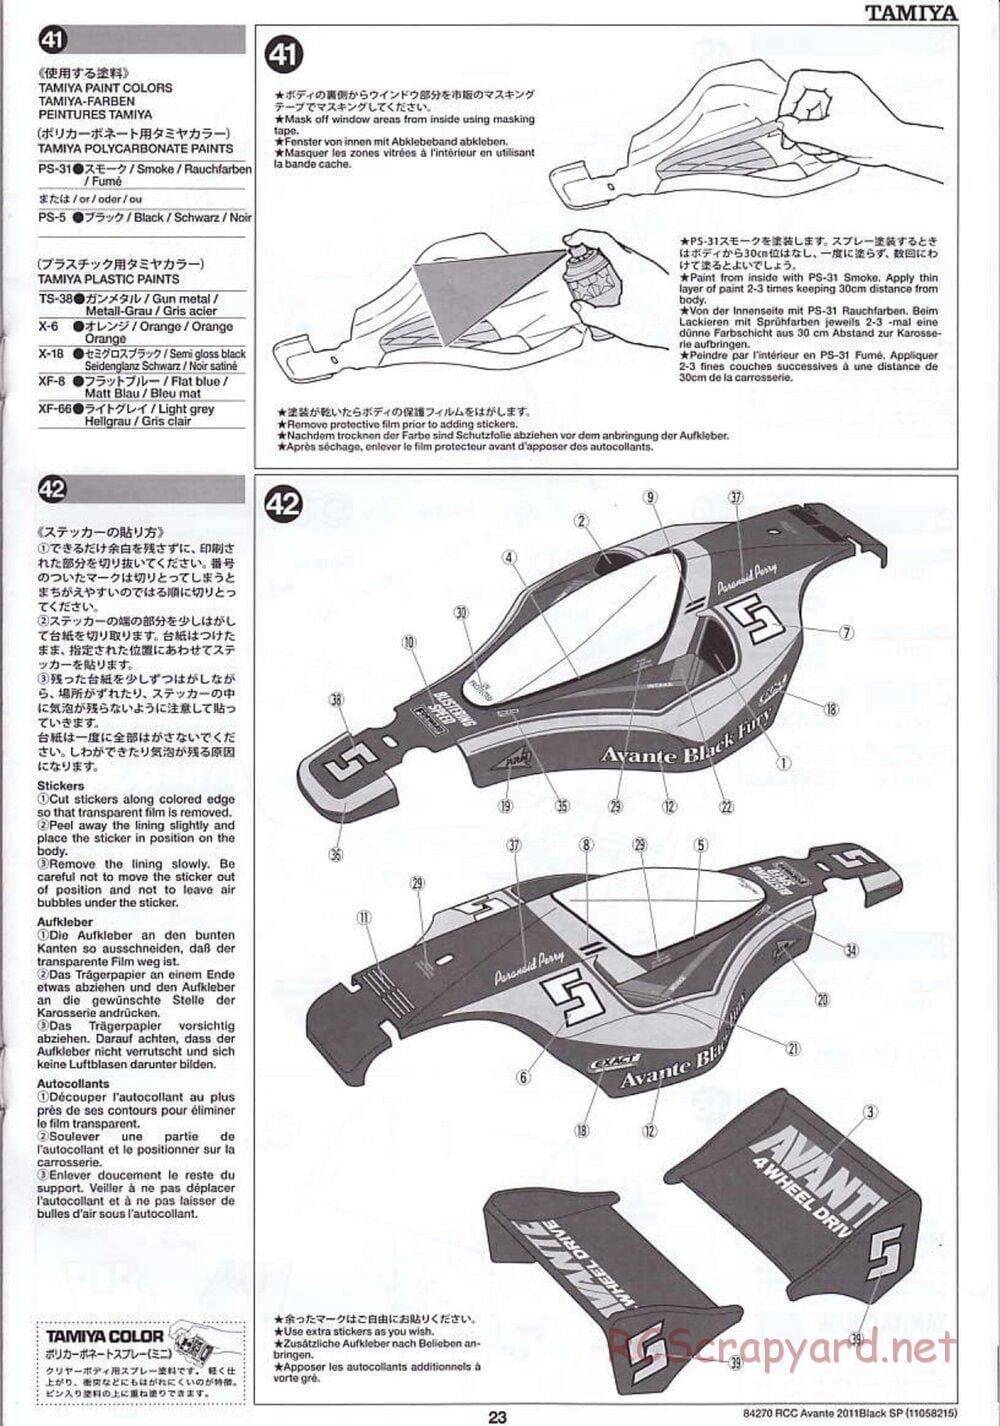 Tamiya - Avante 2011 - Black Special Chassis - Manual - Page 23